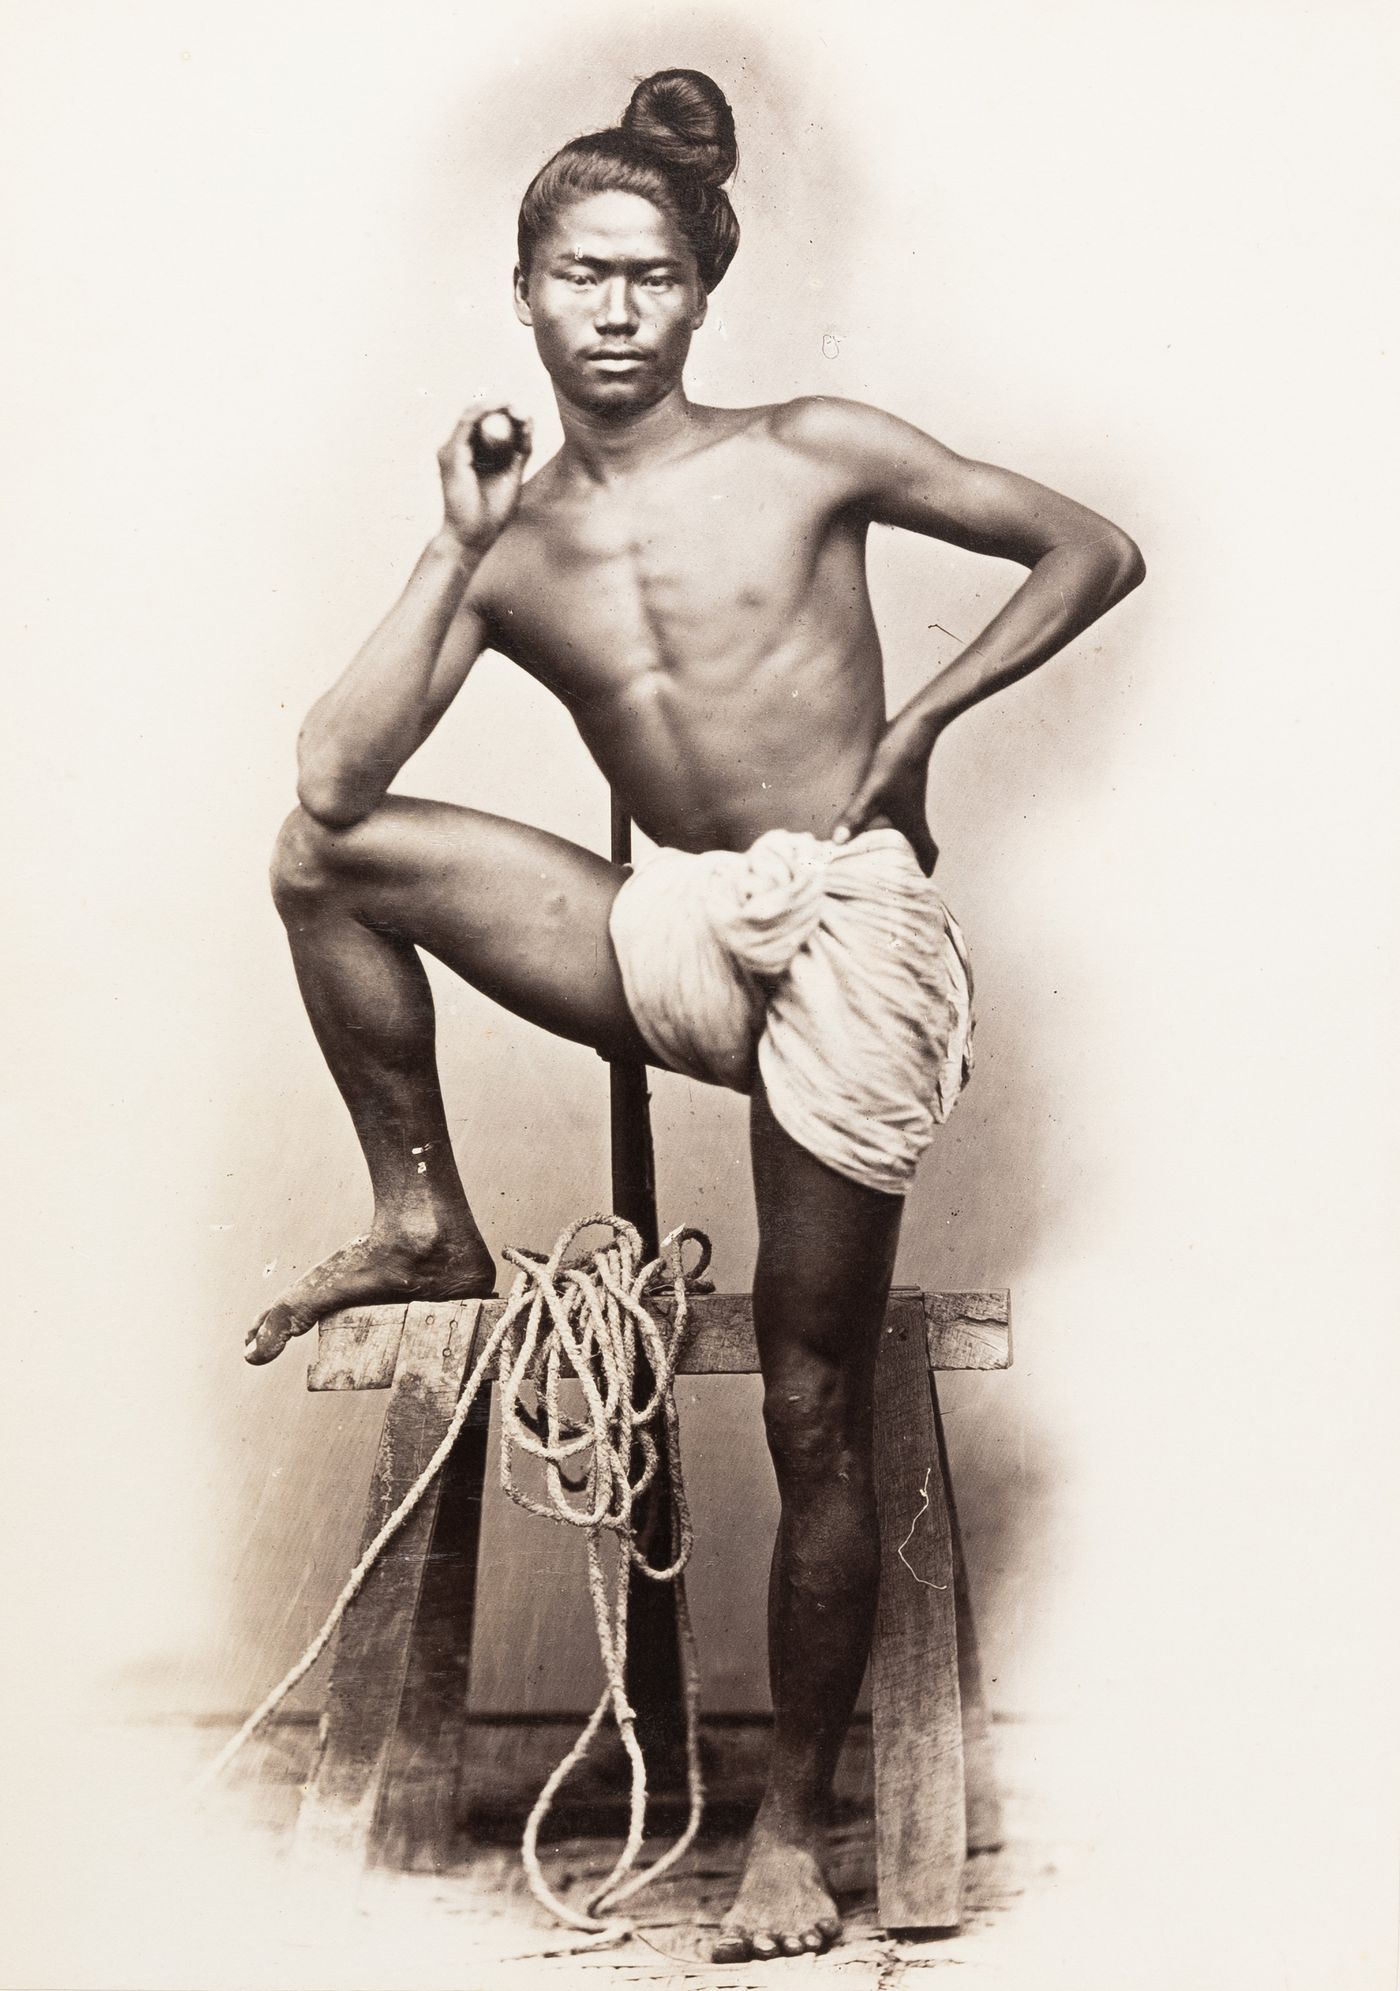 Portrait of a male carpenter standing with one foot on a sawhorse, Burma (now Myanmar)